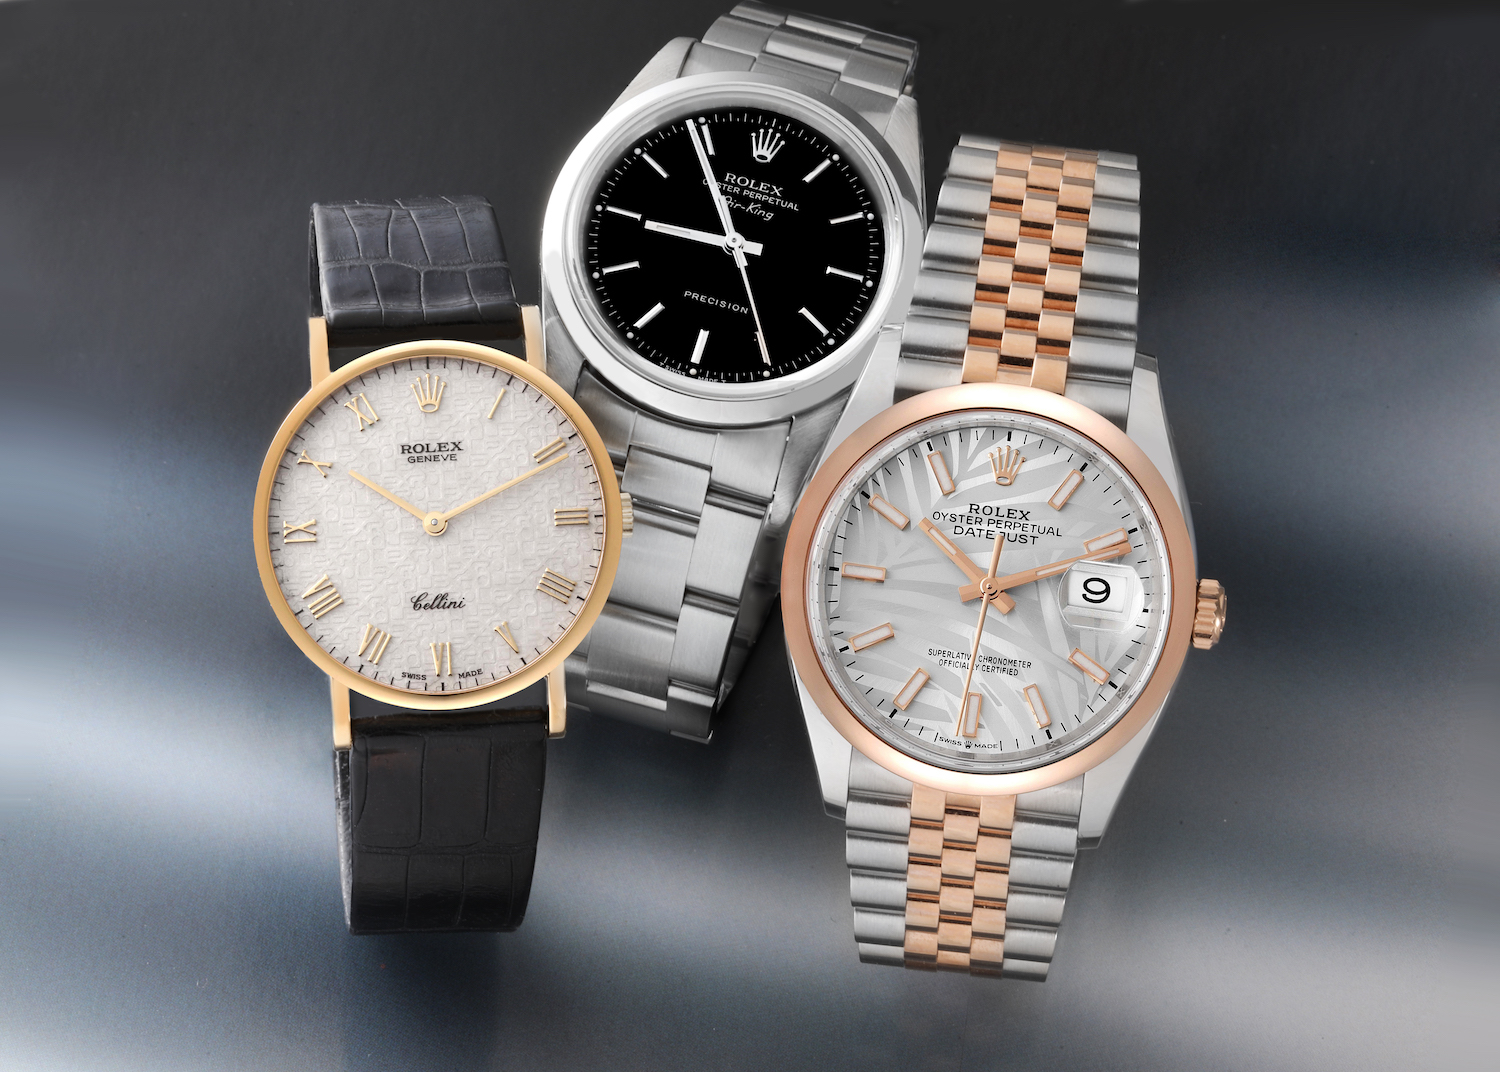 Rolex Watches with Smaller Case Sizes